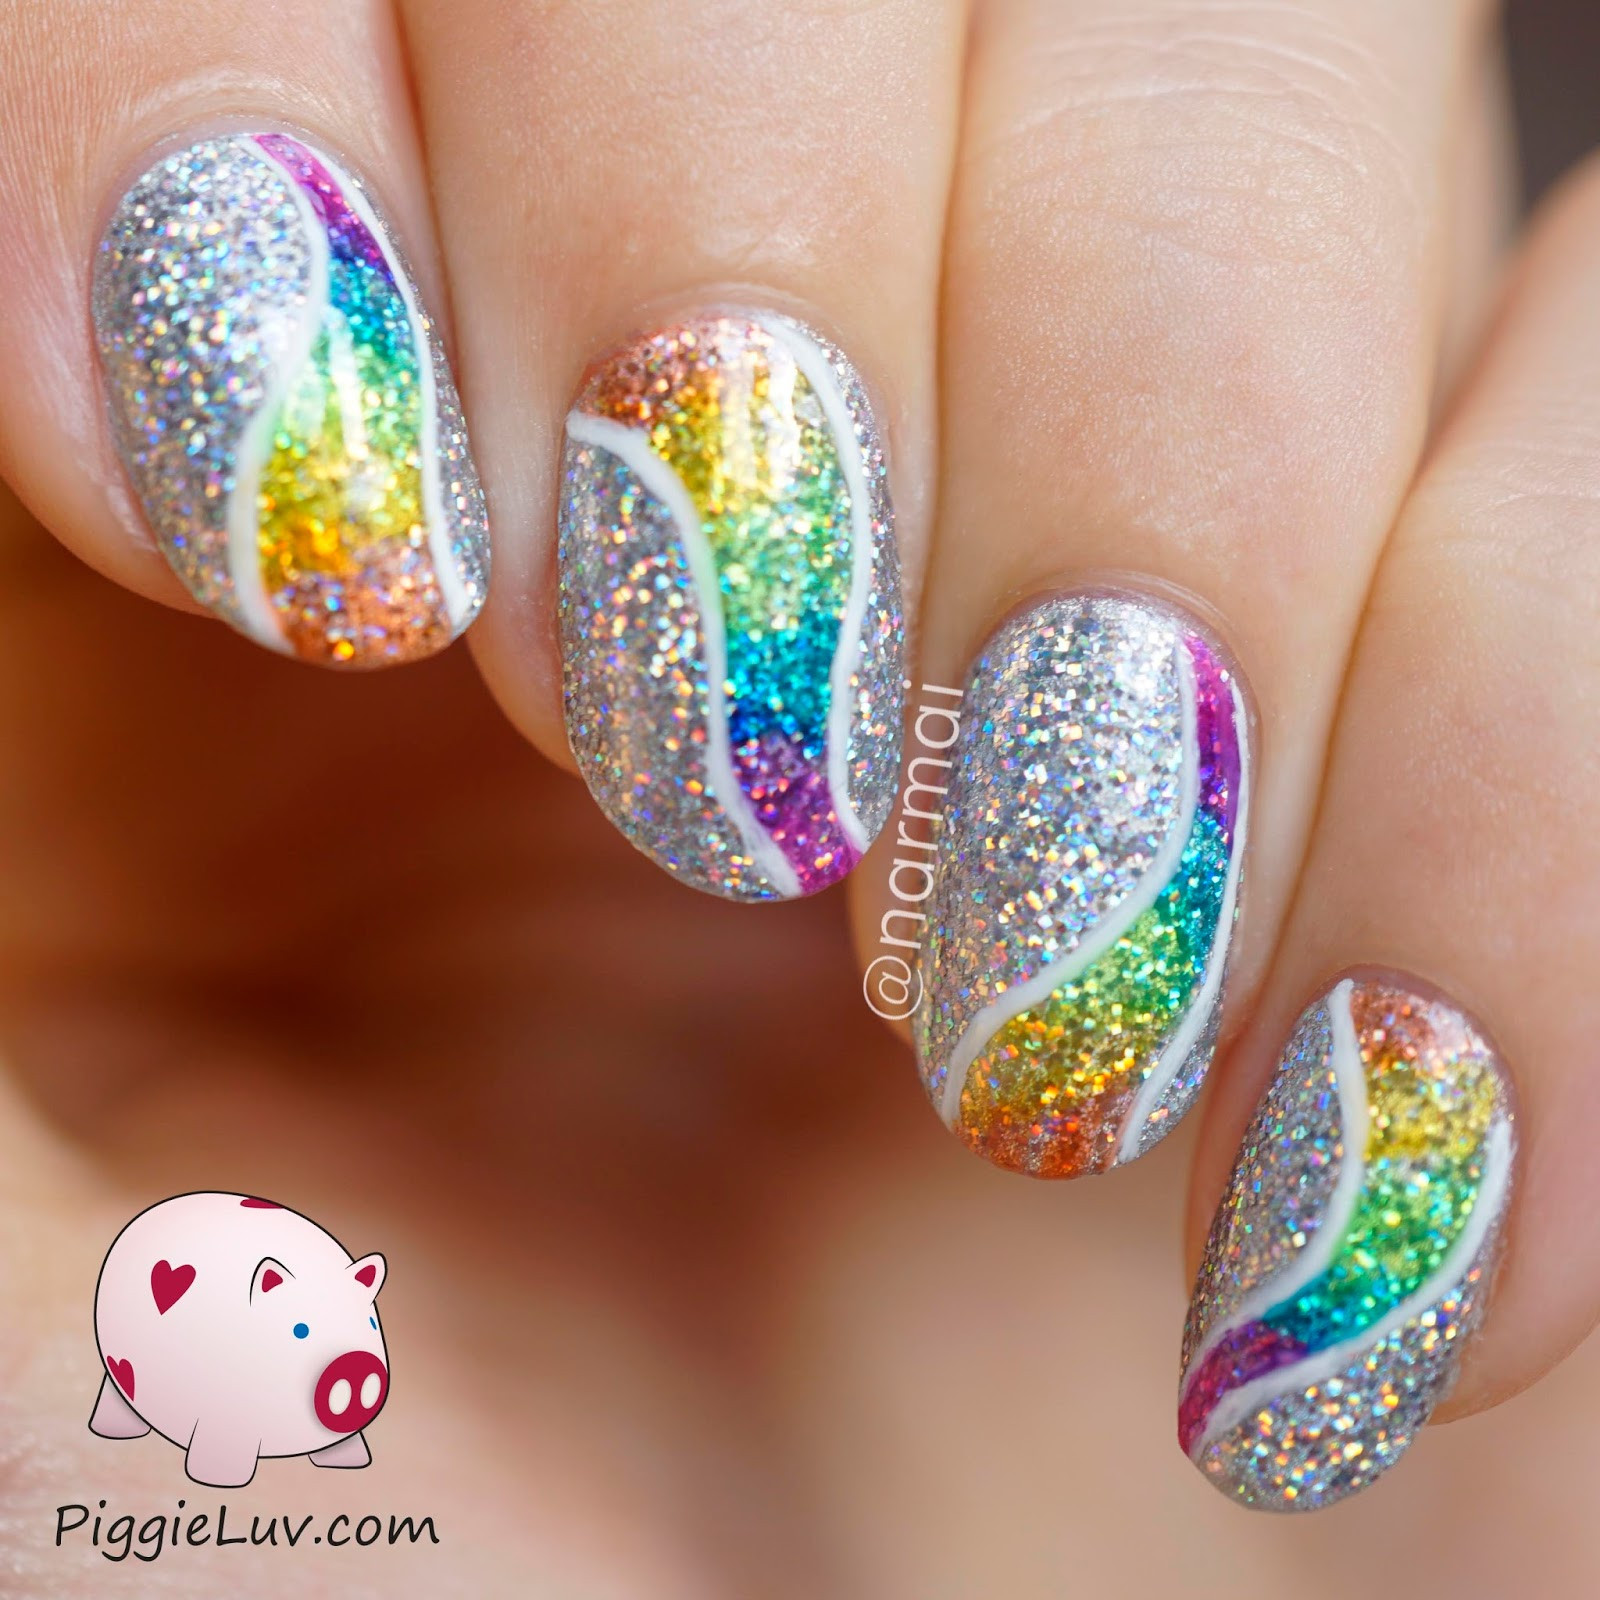 Glitter Nail Art Designs Pictures
 white tip nail designs with glitter